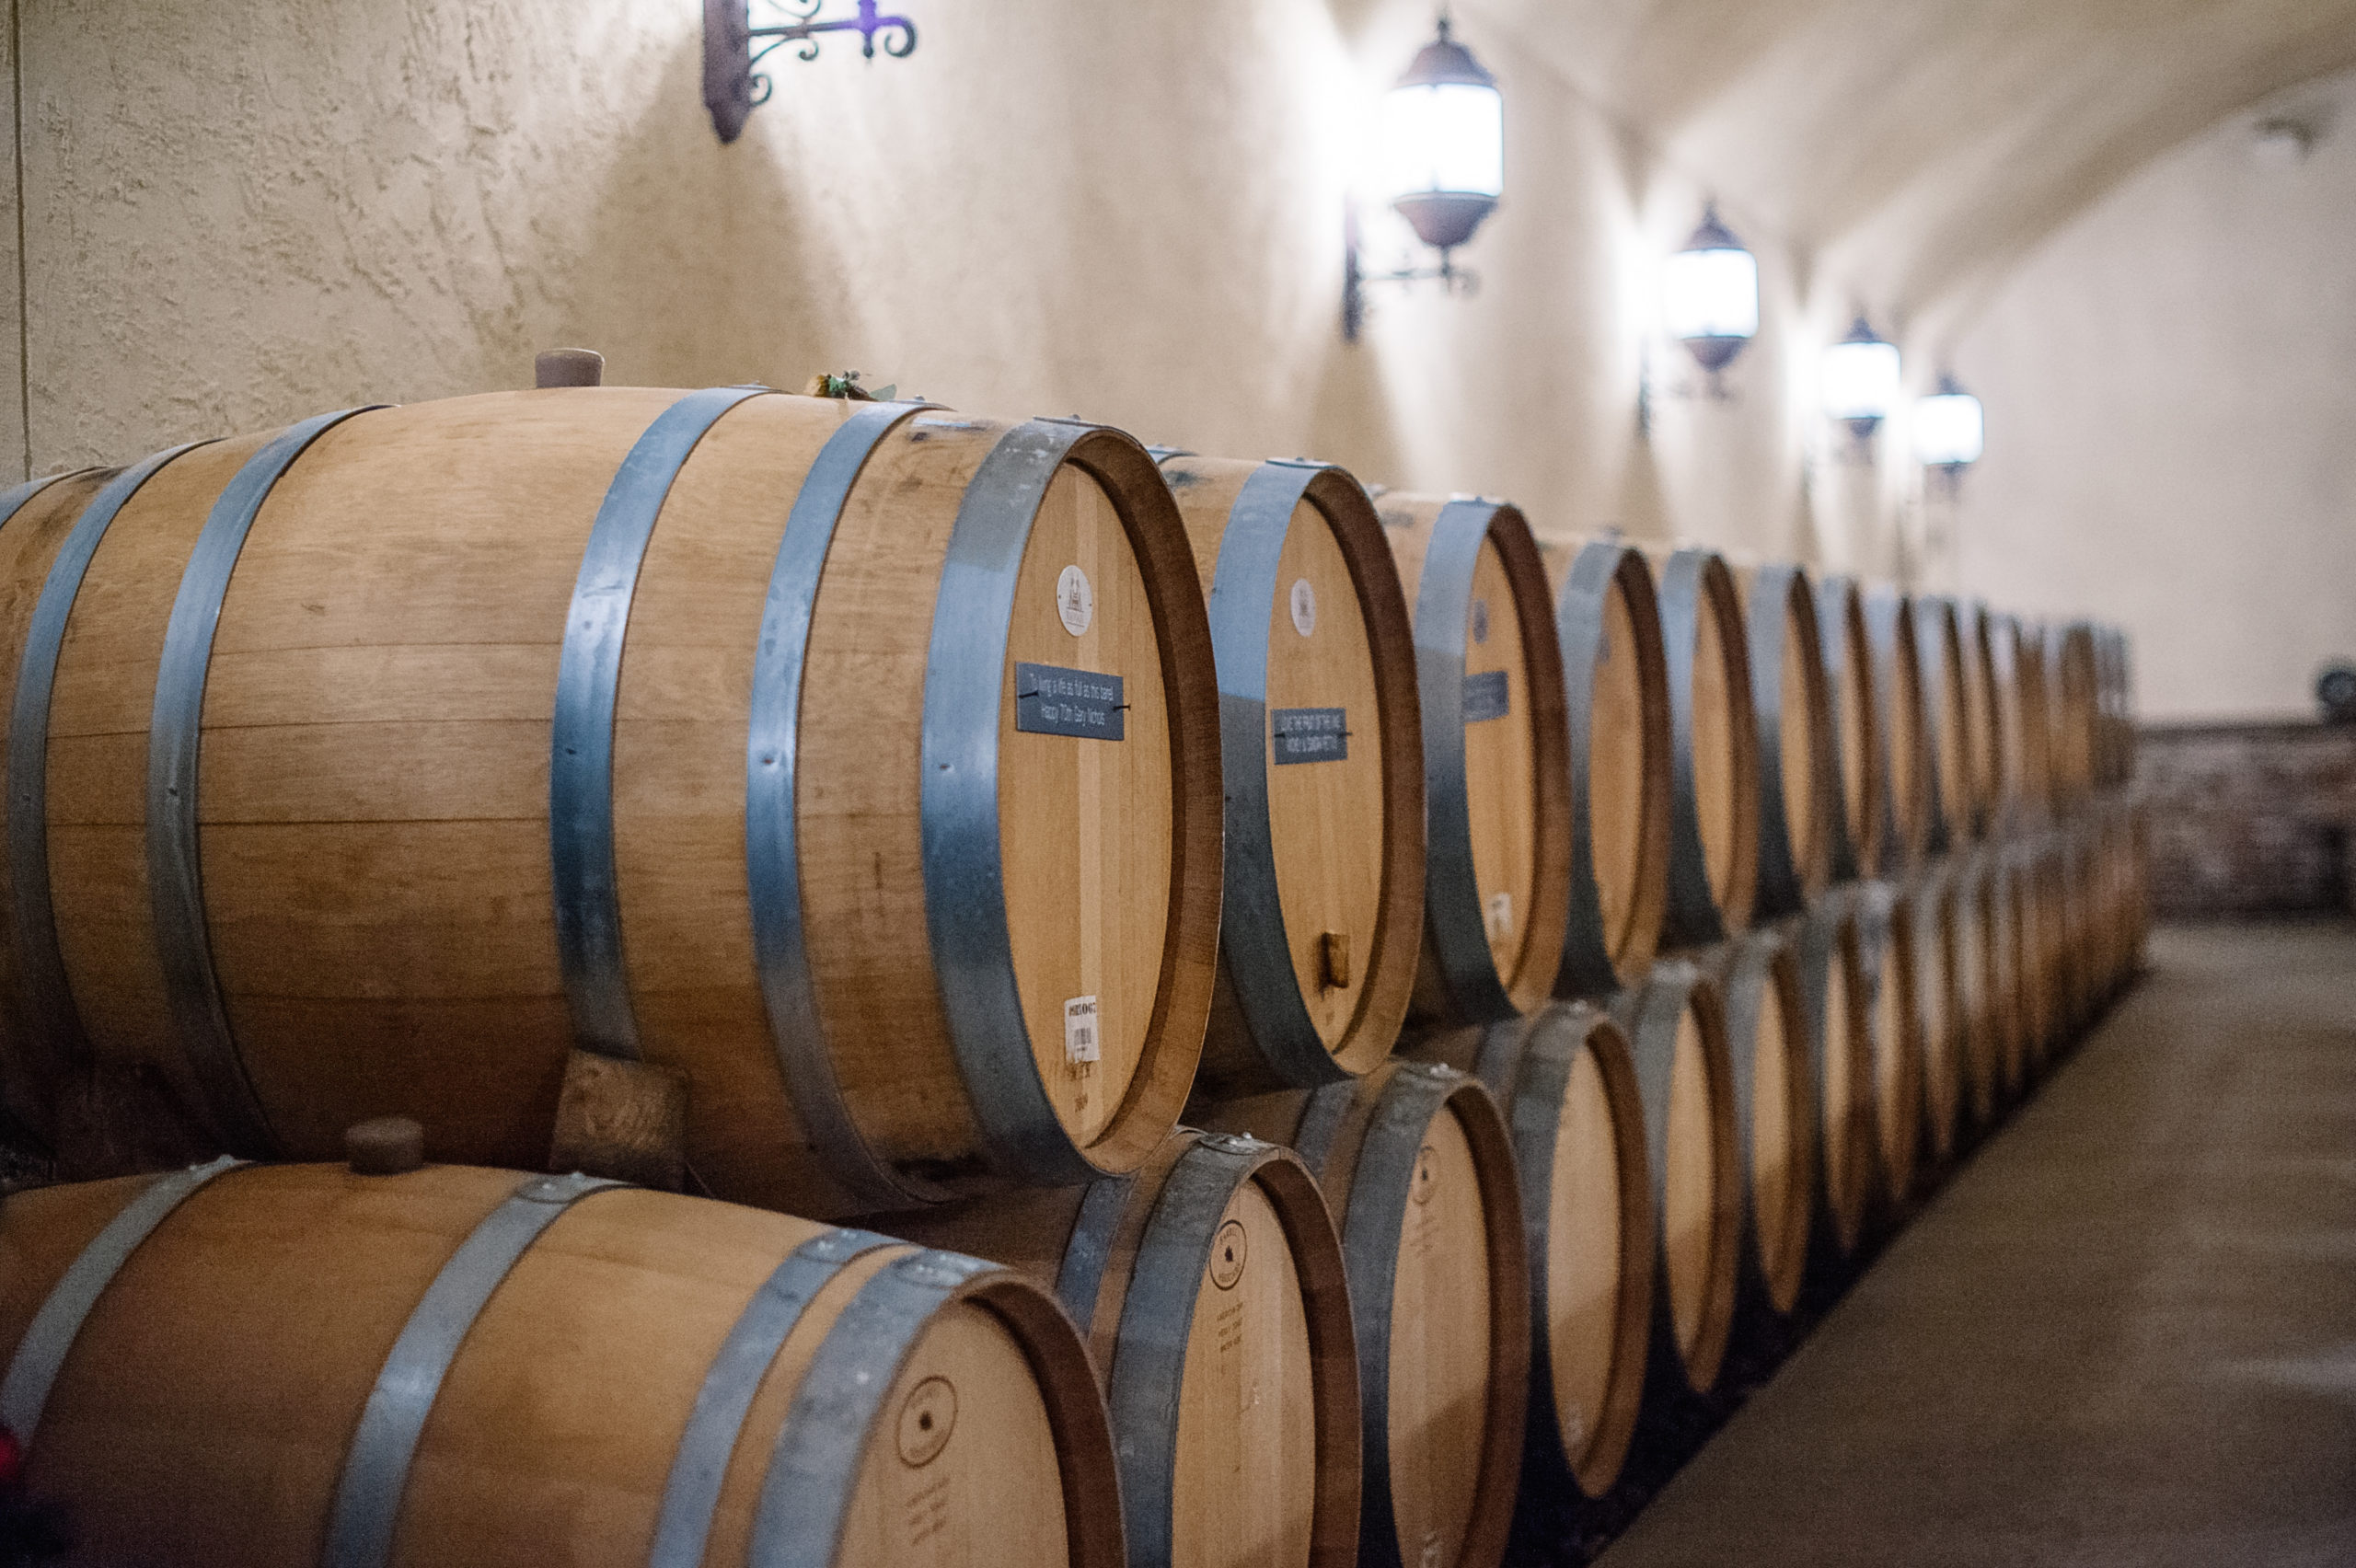 Two rows of wine barrels stacked on top of each other in a winery's cellar